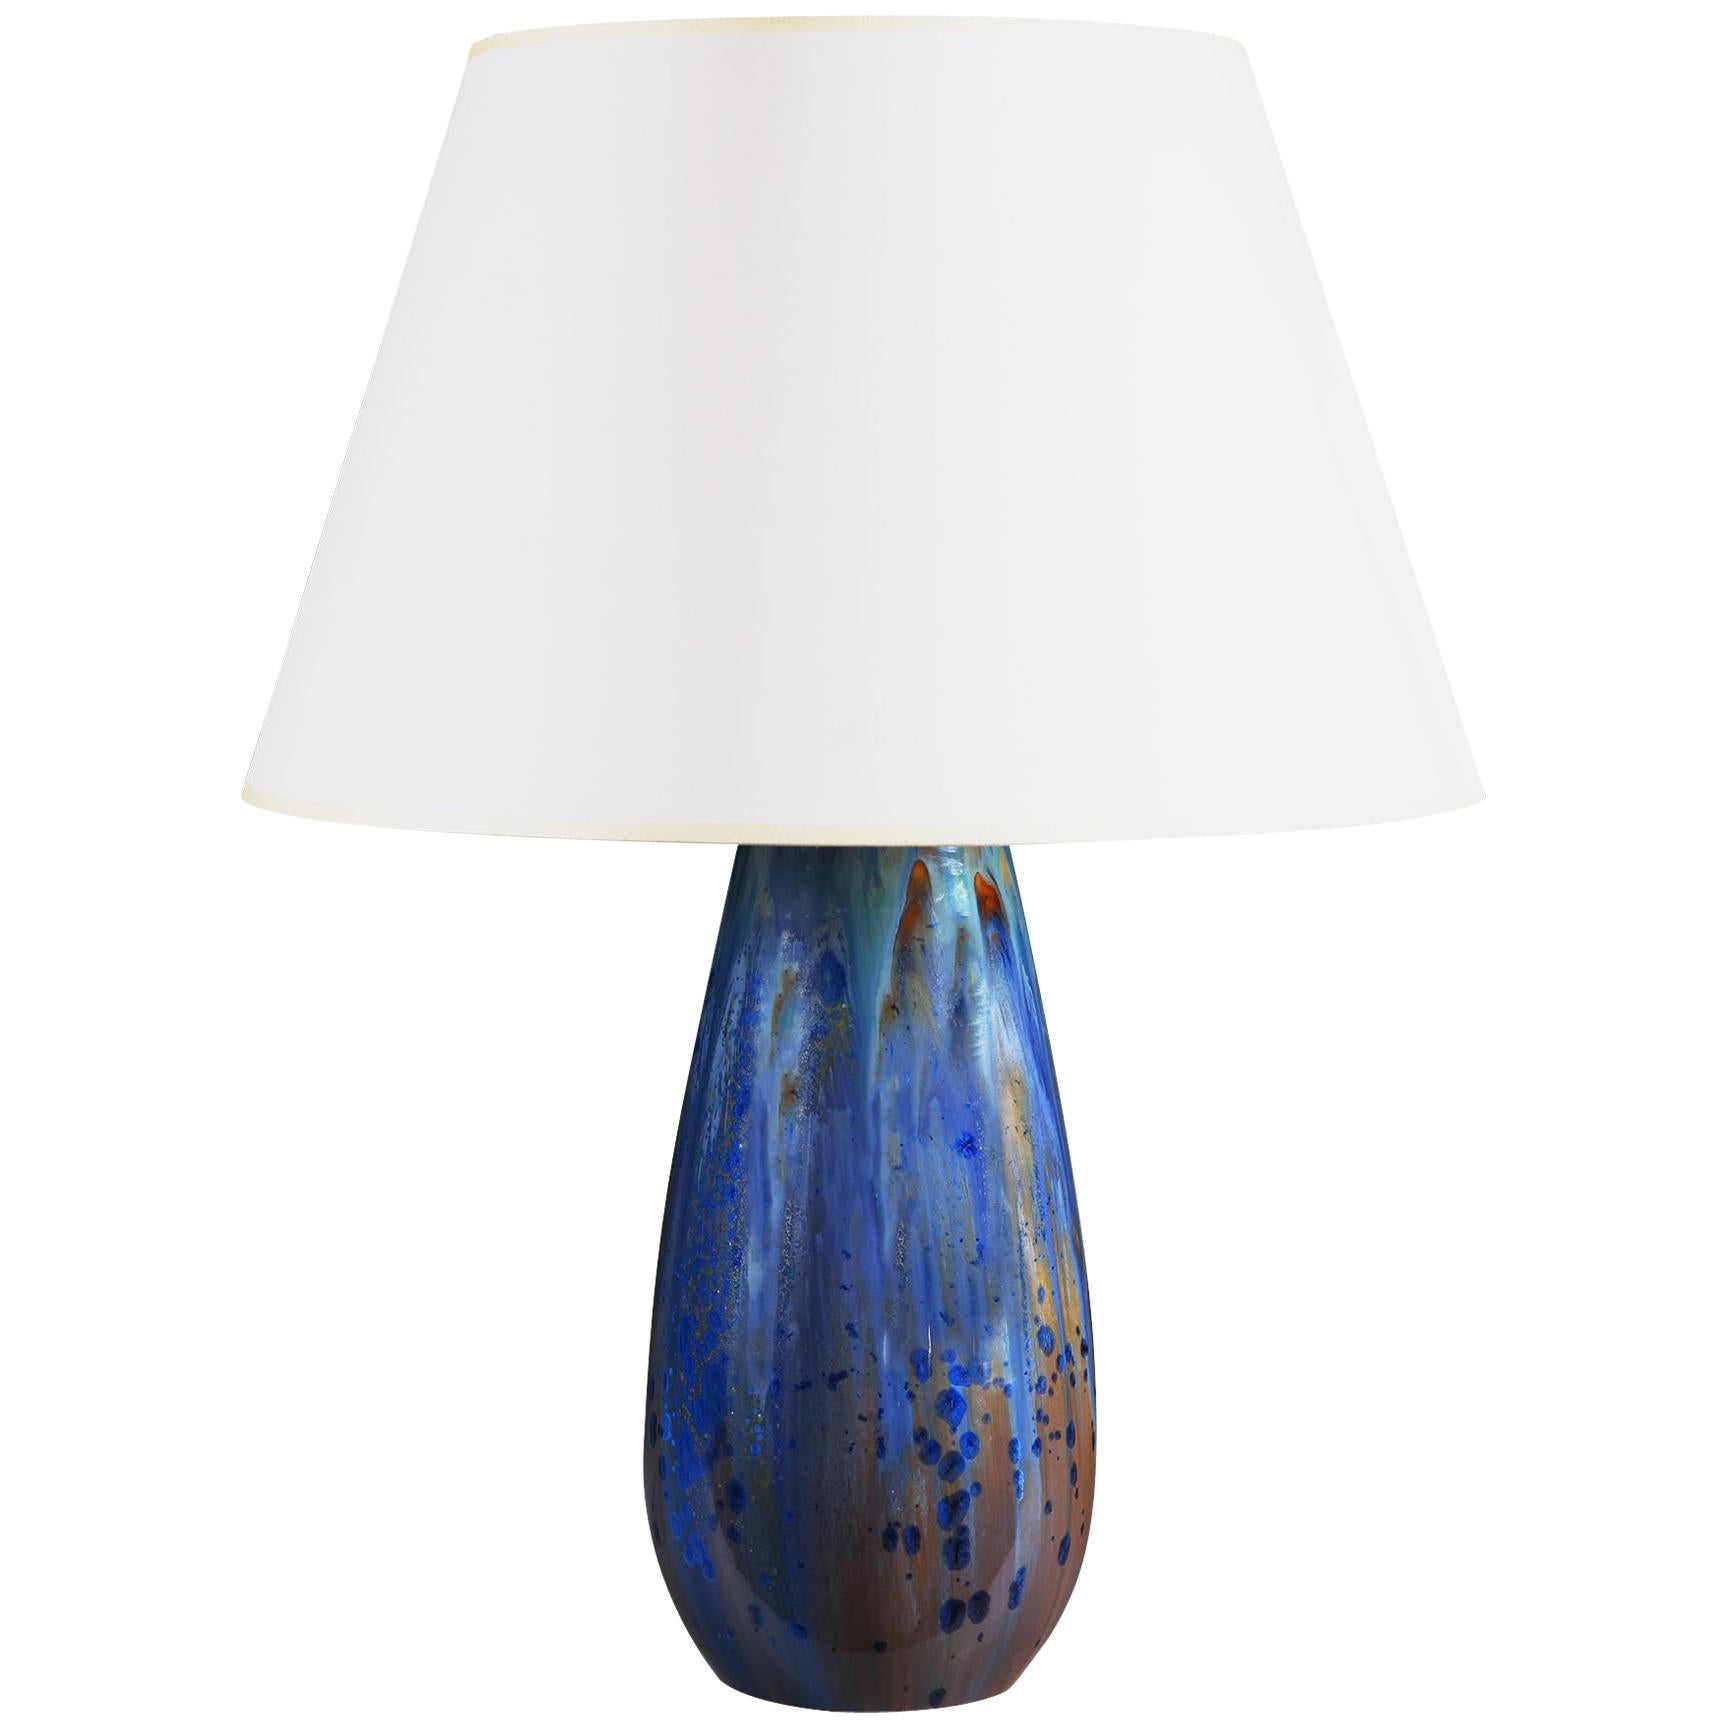 Early 20th Century Art Pottery Blue Glaze Vase as a Table Lamp by Pierrefonds